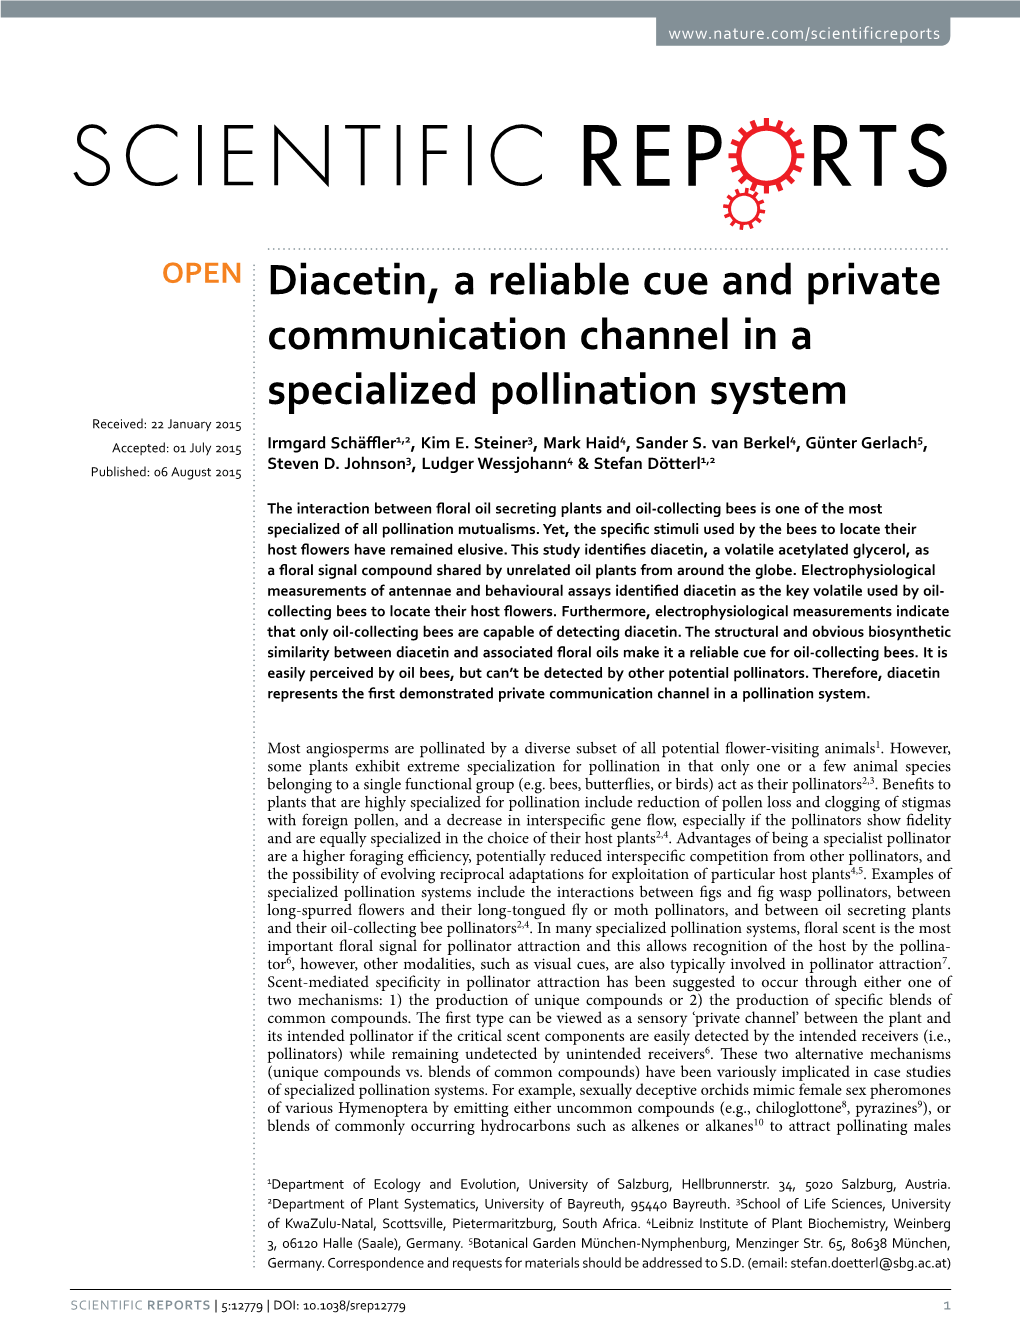 Diacetin, a Reliable Cue and Private Communication Channel in A